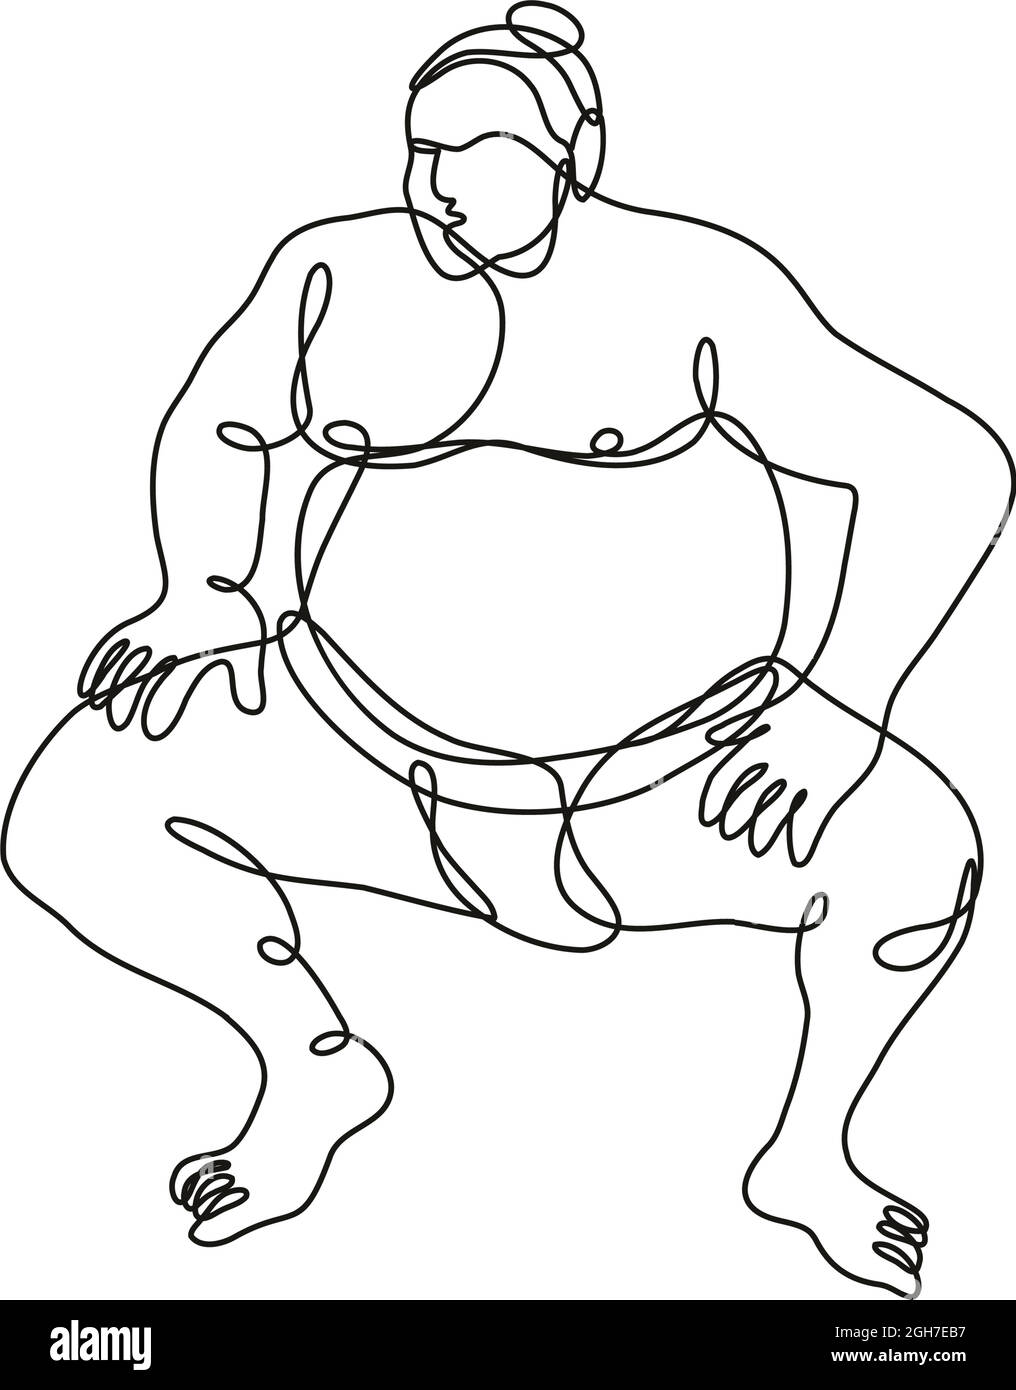 Continuous line drawing illustration of a sumo wrestler or rikishi in fighting stance front view done in mono line or doodle style in black and white Stock Vector